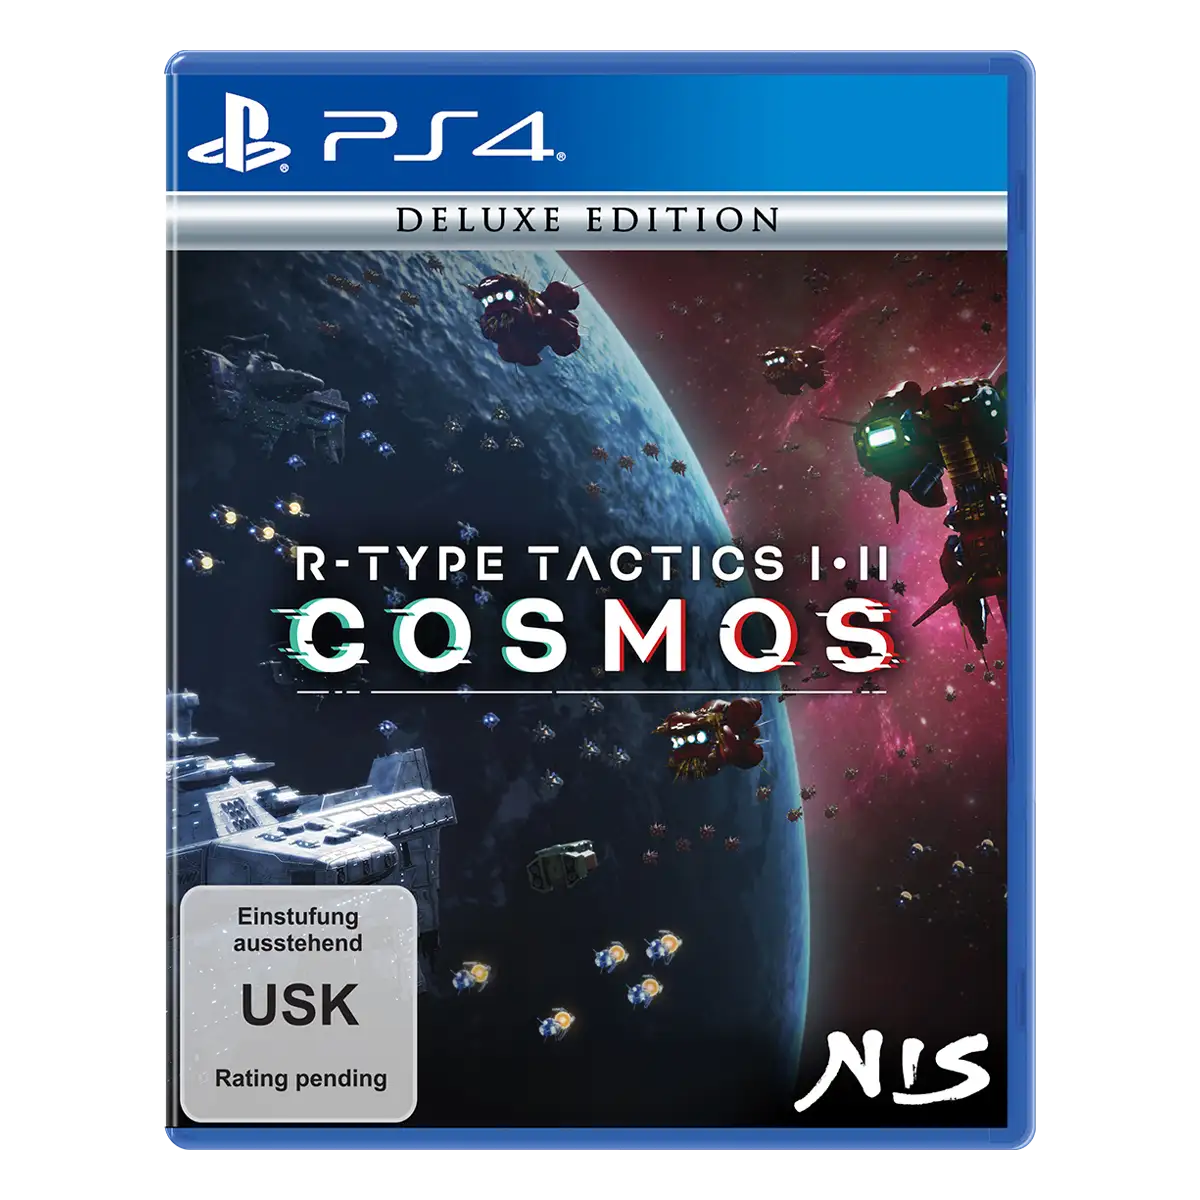 R-Type Tactics 1&2 Cosmos Deluxe Edition (PS4) Cover